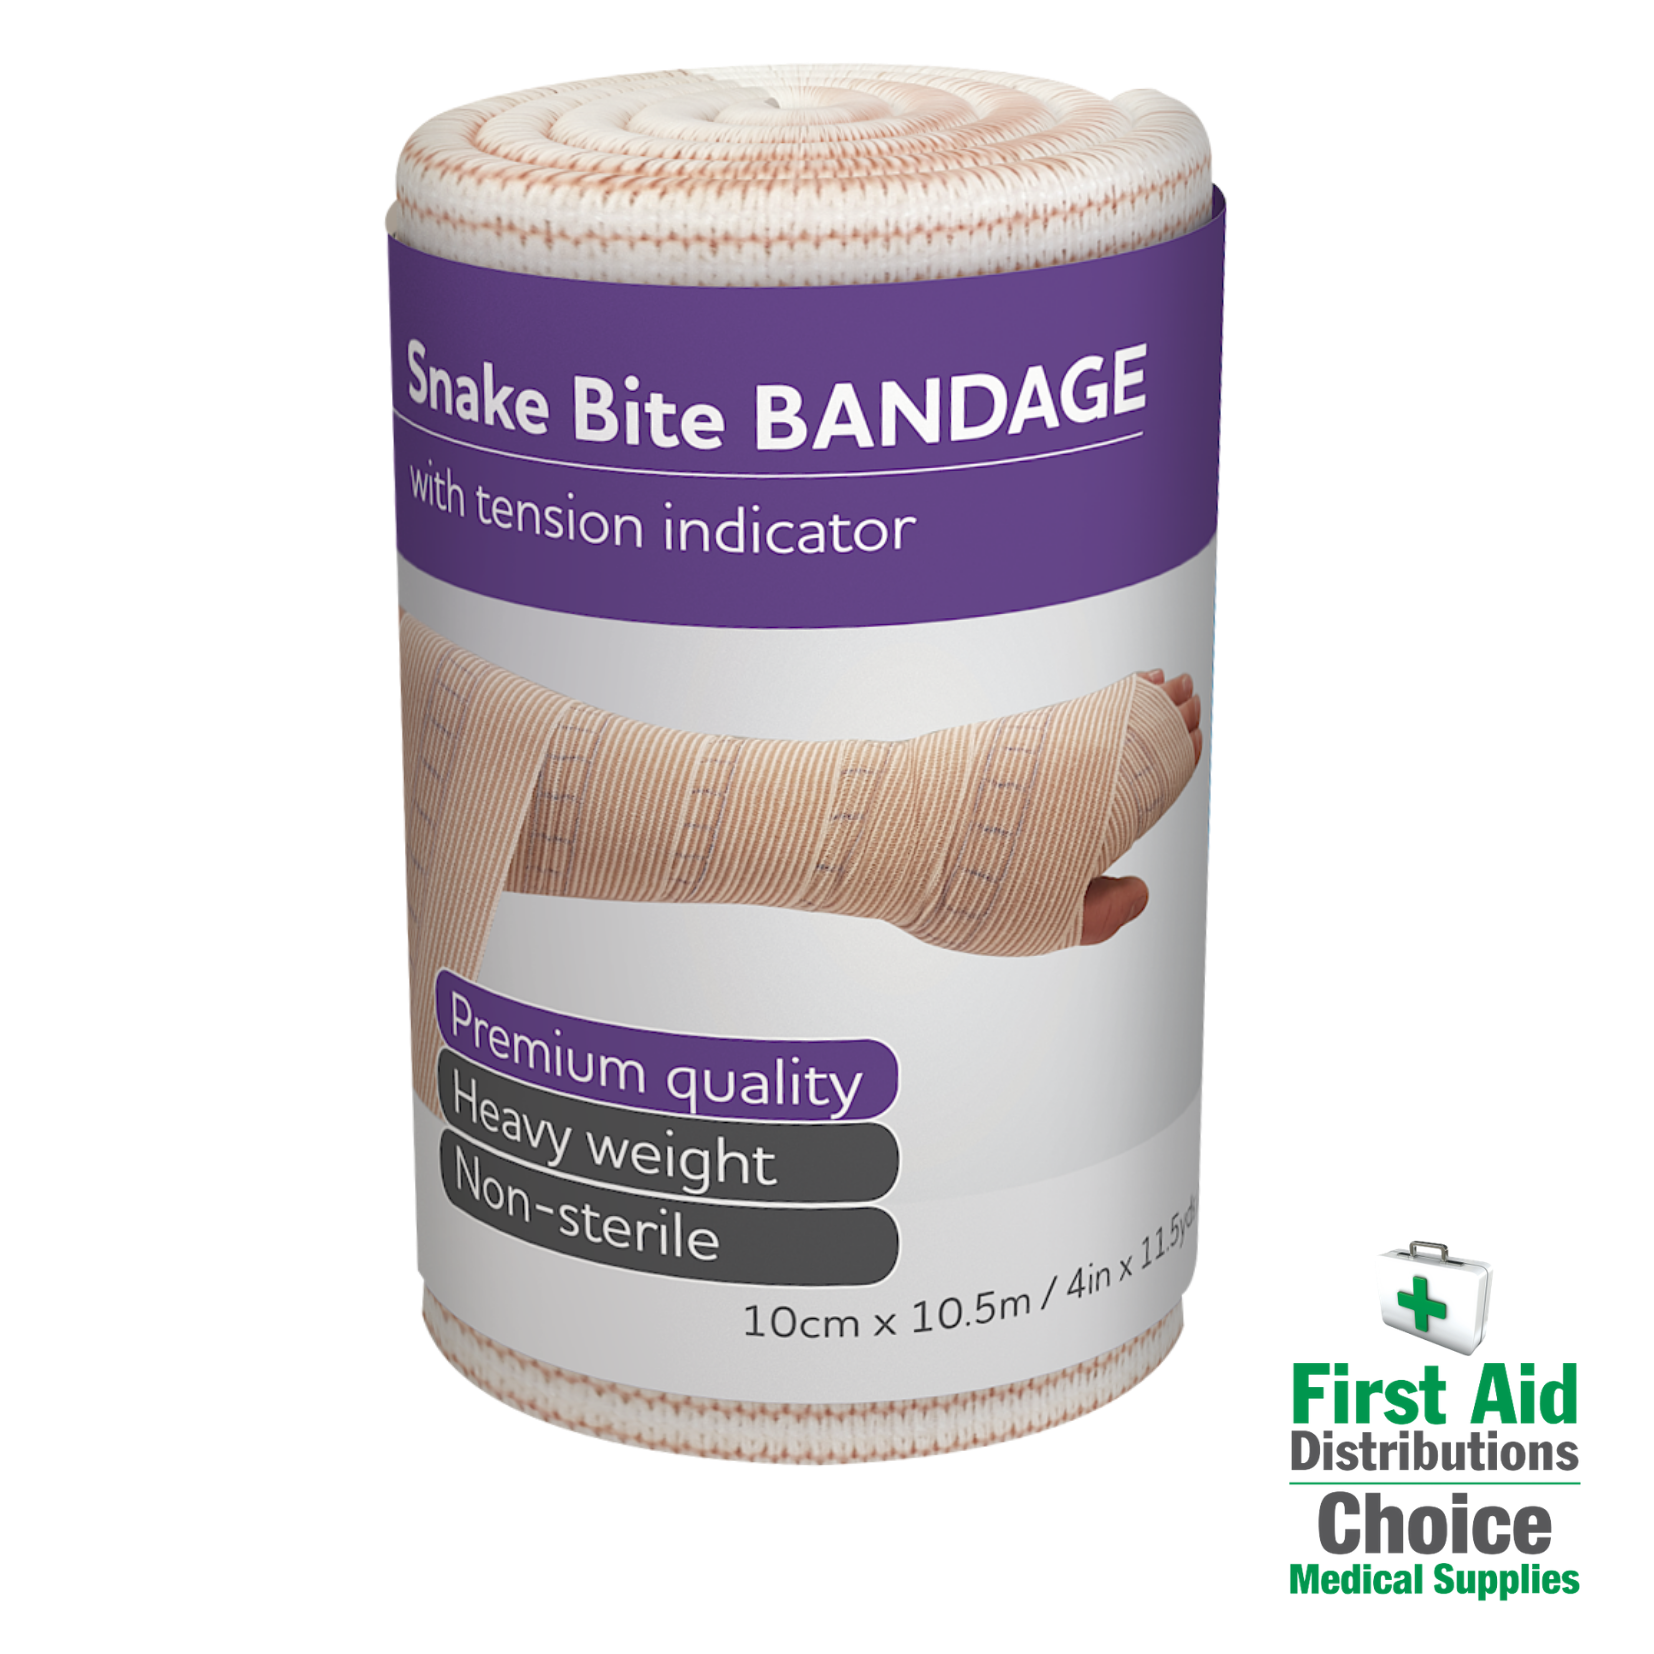 collections/Snakebite_Bandage_First_Aid_Distributions.png